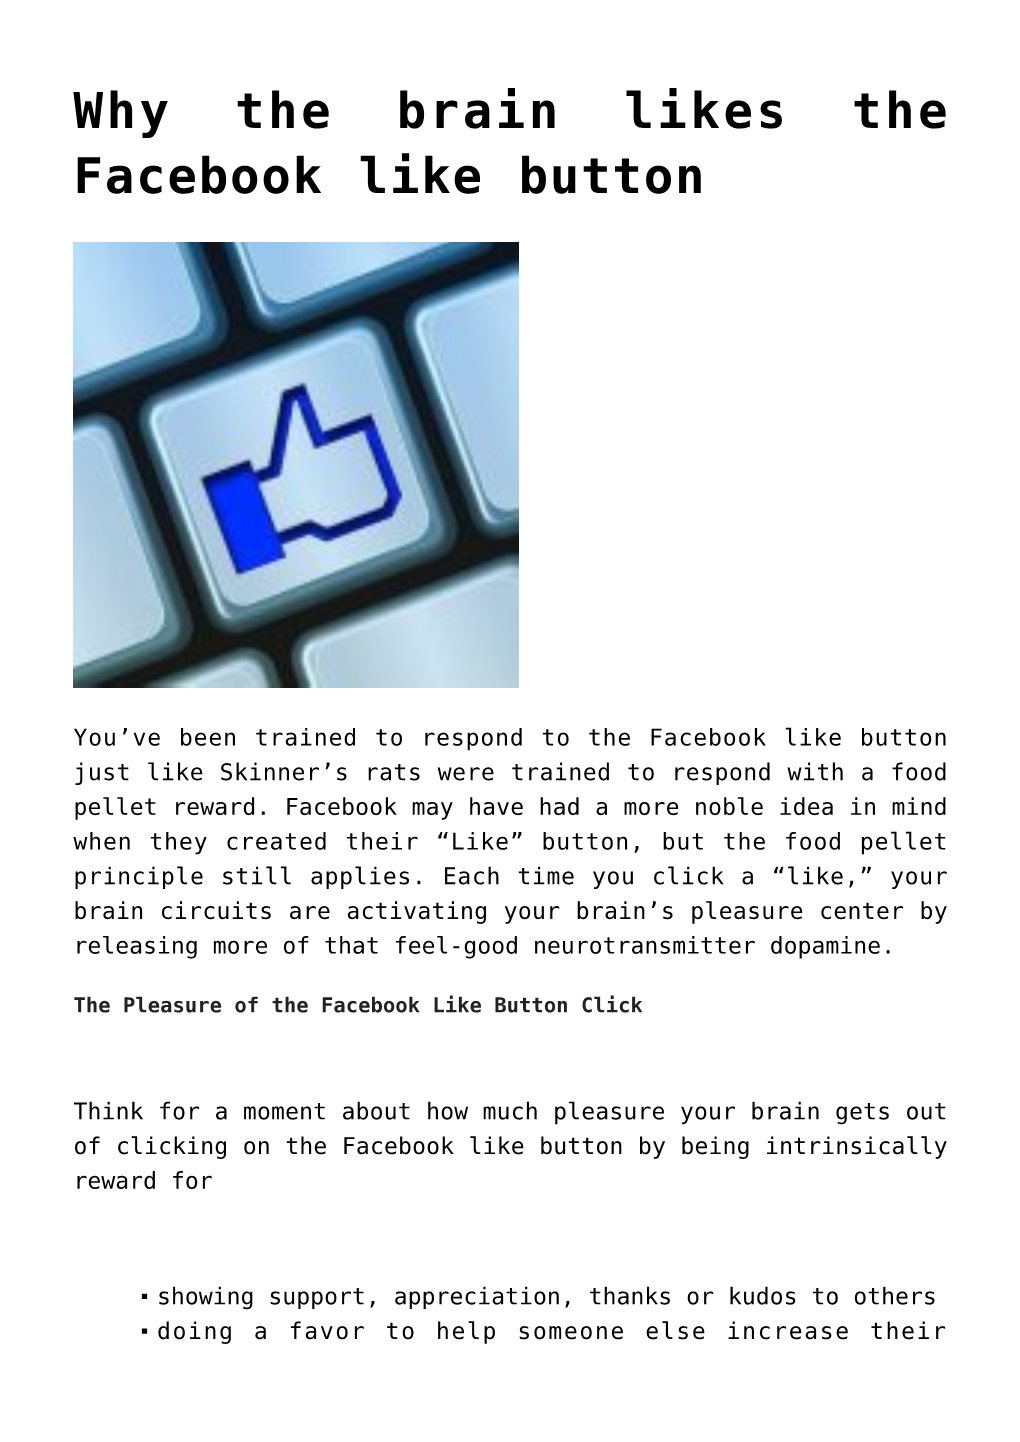 Why the Brain Likes the Facebook Like Button